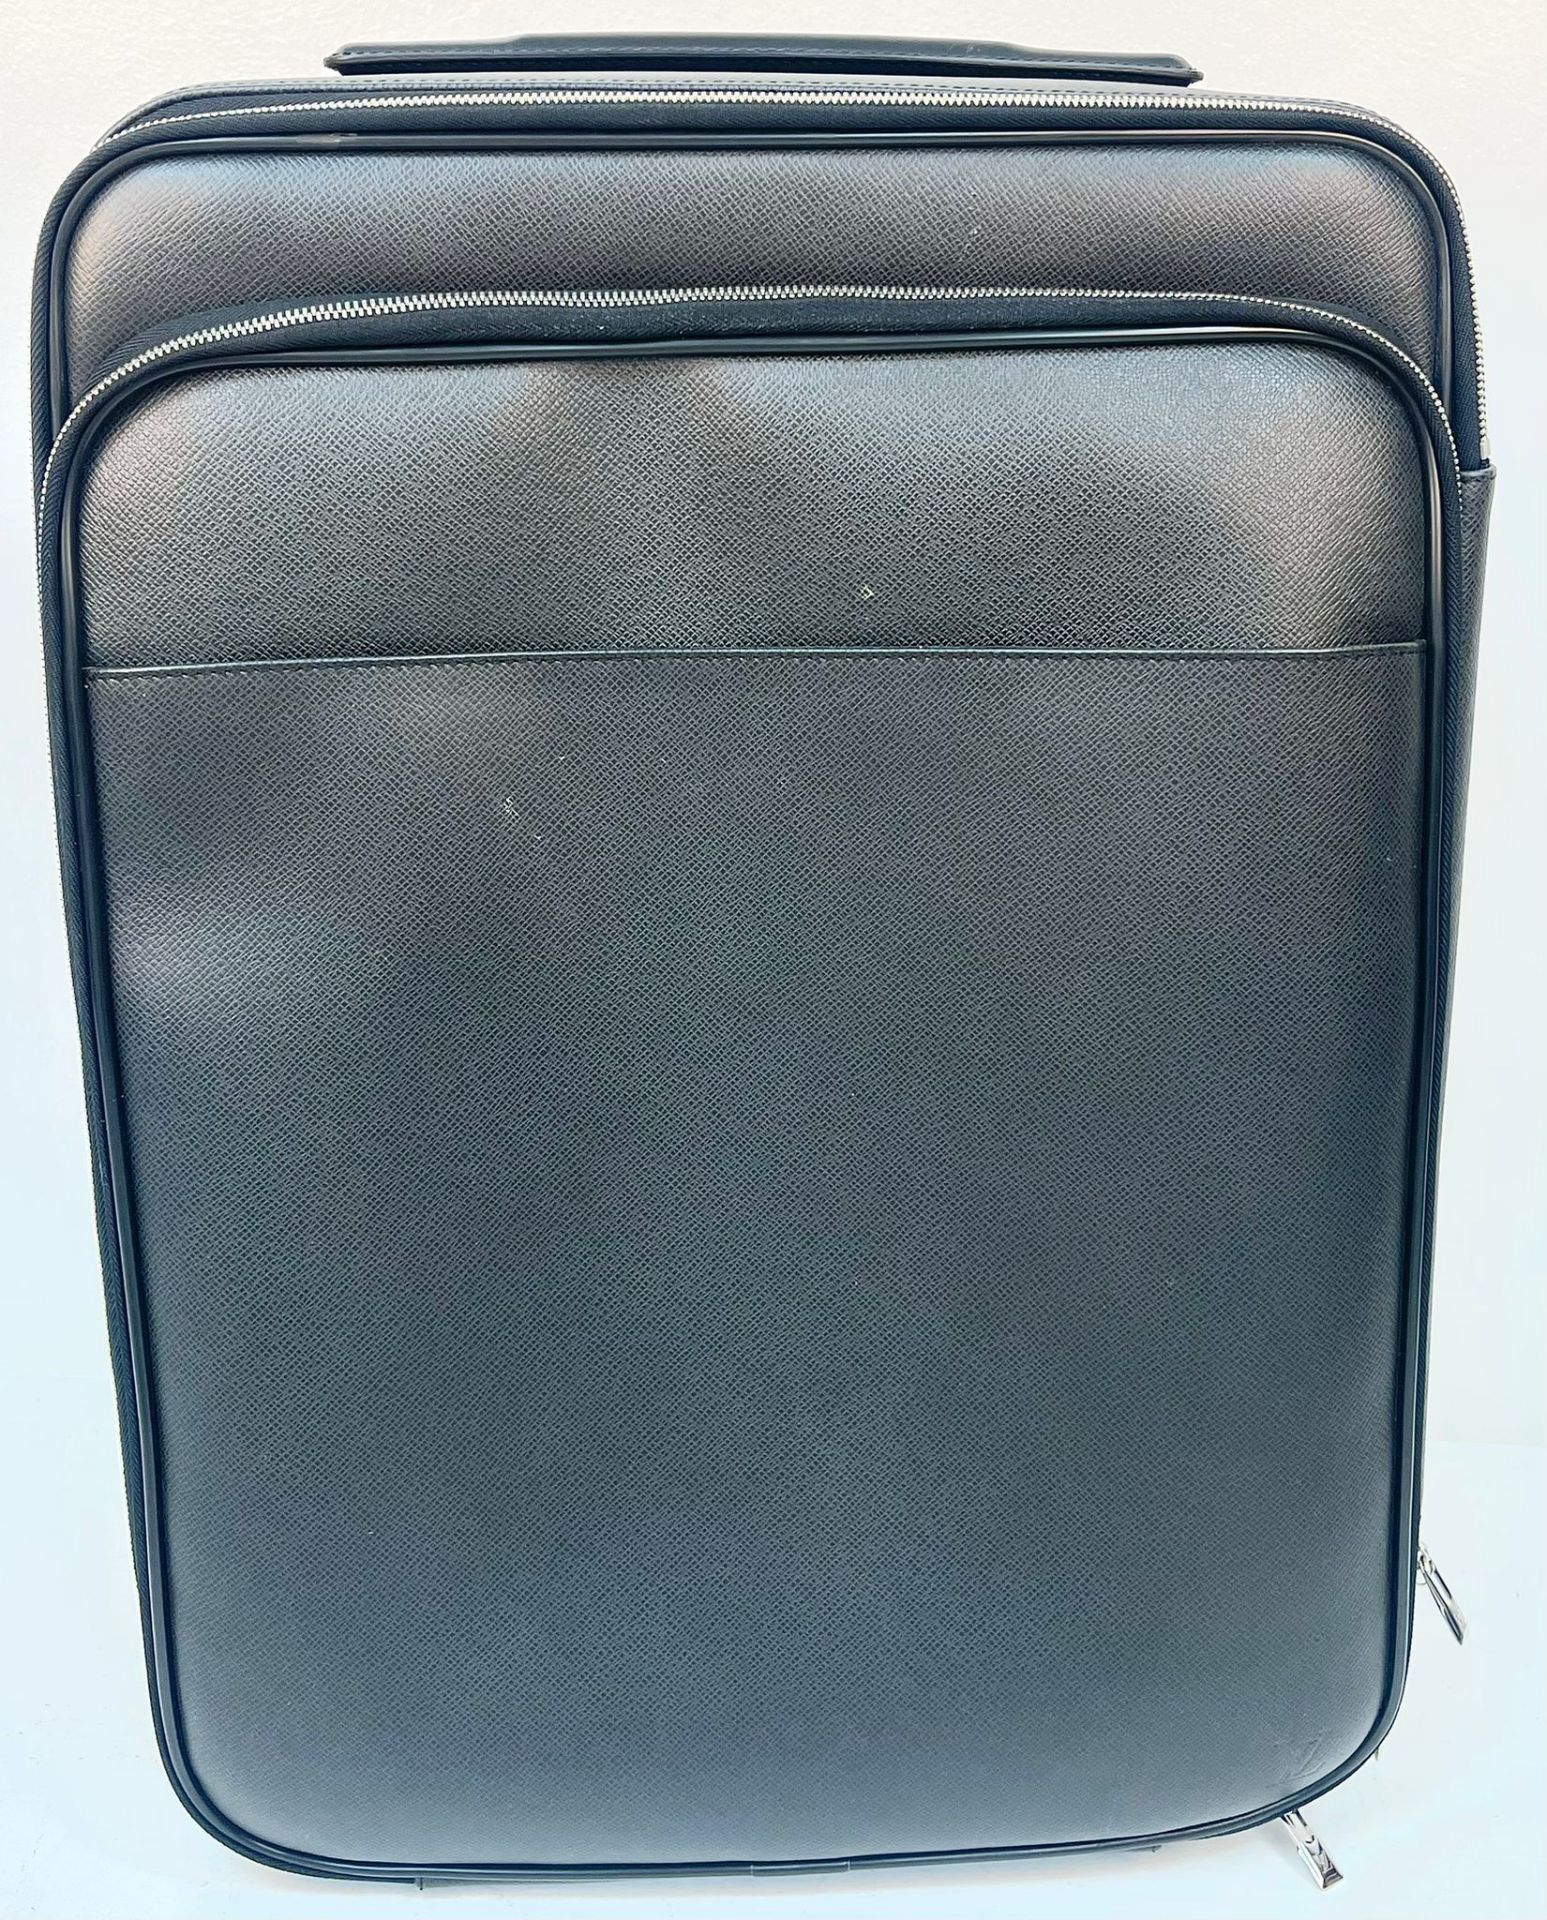 A Louis Vuitton Pegase Taiga Leather Suitcase. Extendable trolley-pull handle. Twin wheels. Black